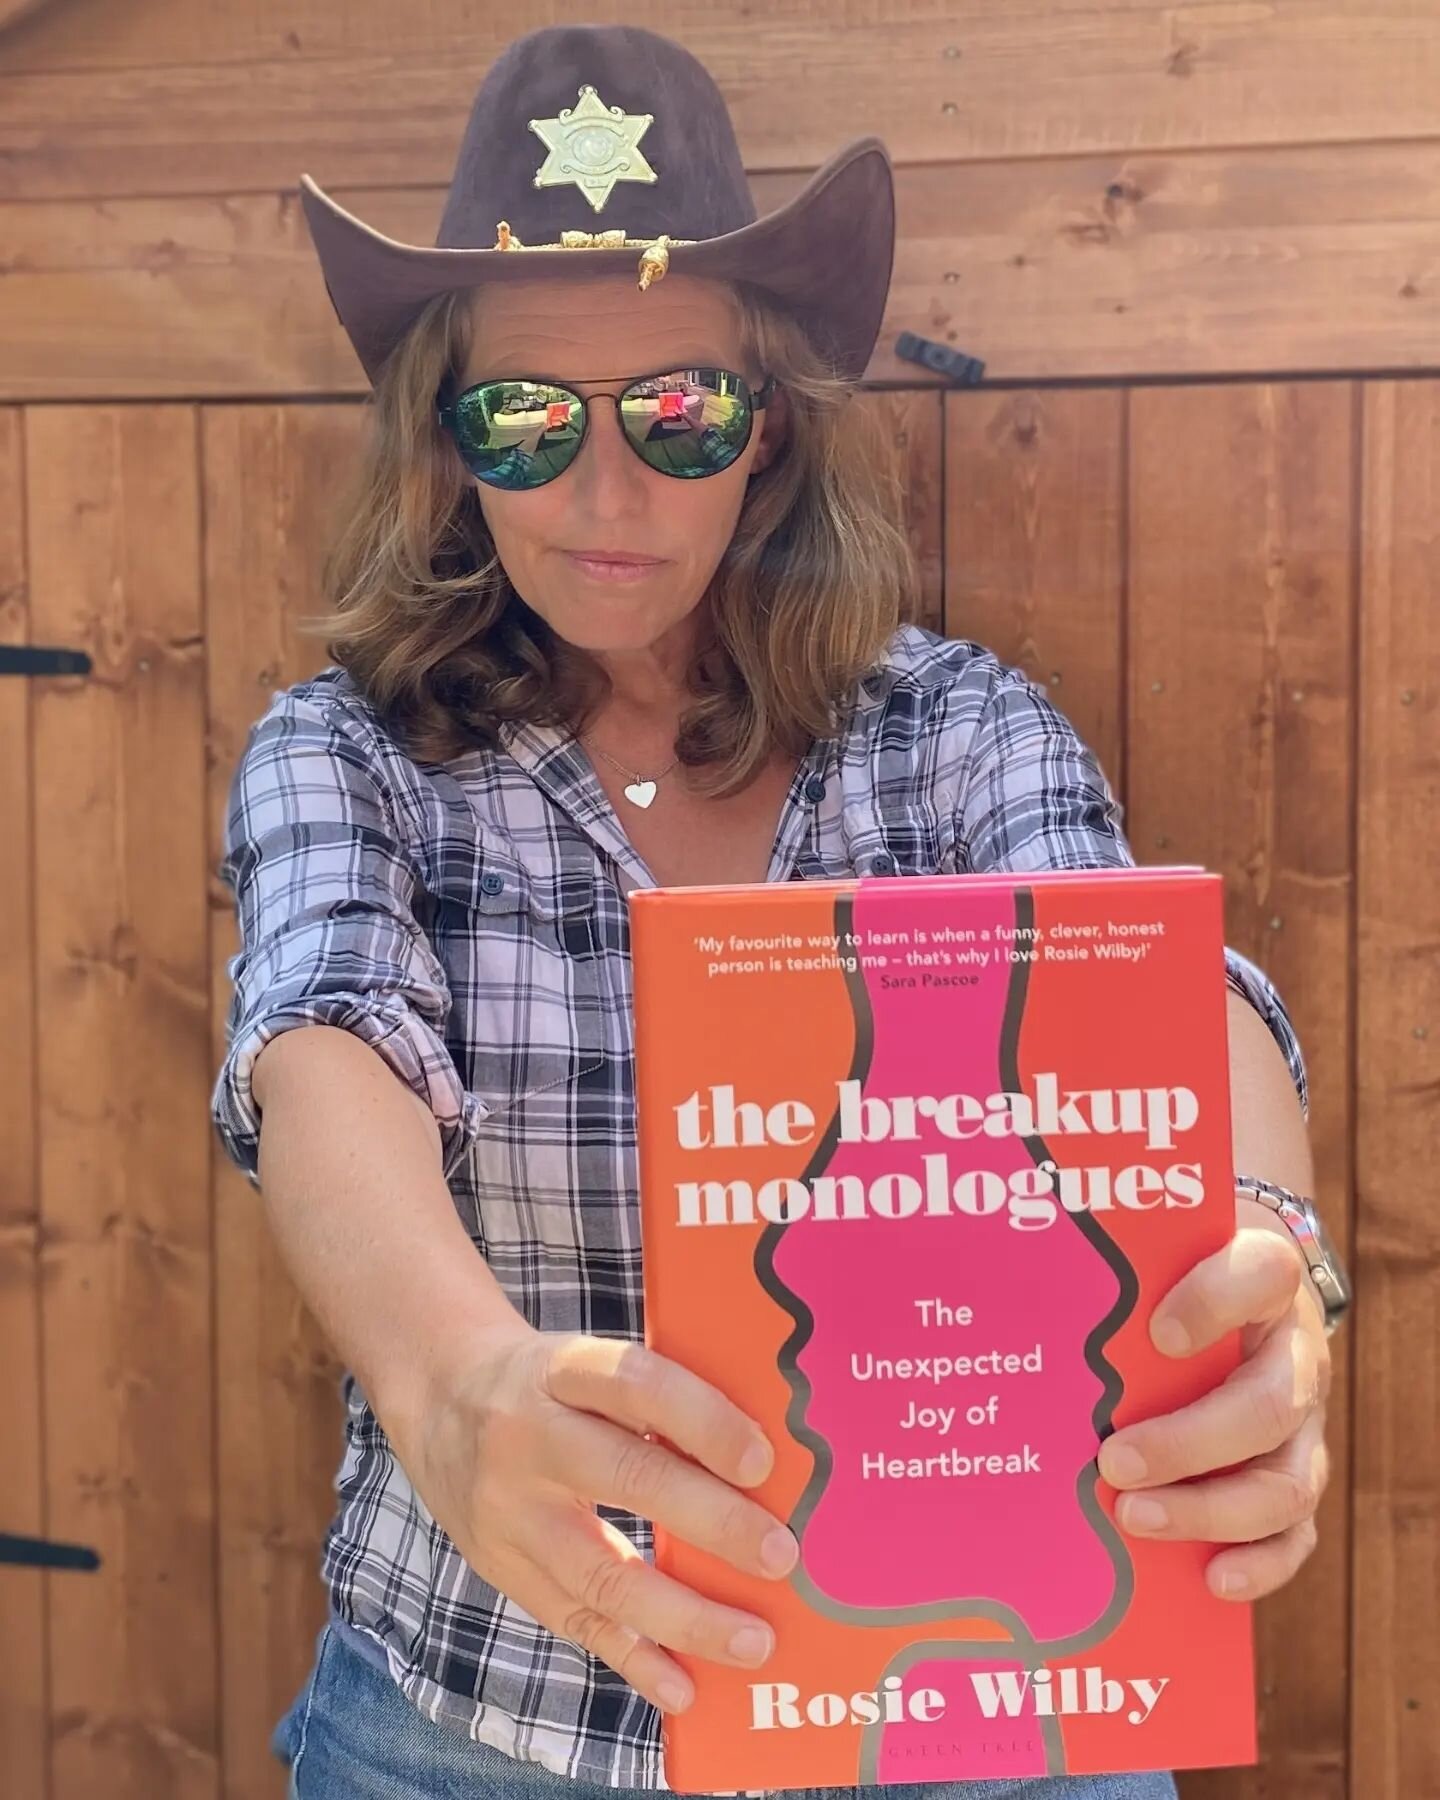 We're excited to start revealing our lovely line-up for Hay Pride, Sunday 12th June 🌟🌟🌟🌟🌟

Award-winning comedian and author Rosie Wilby @breakupmonologues (pictured) will present standup comedy and book readings for us at @globeathay on the eve